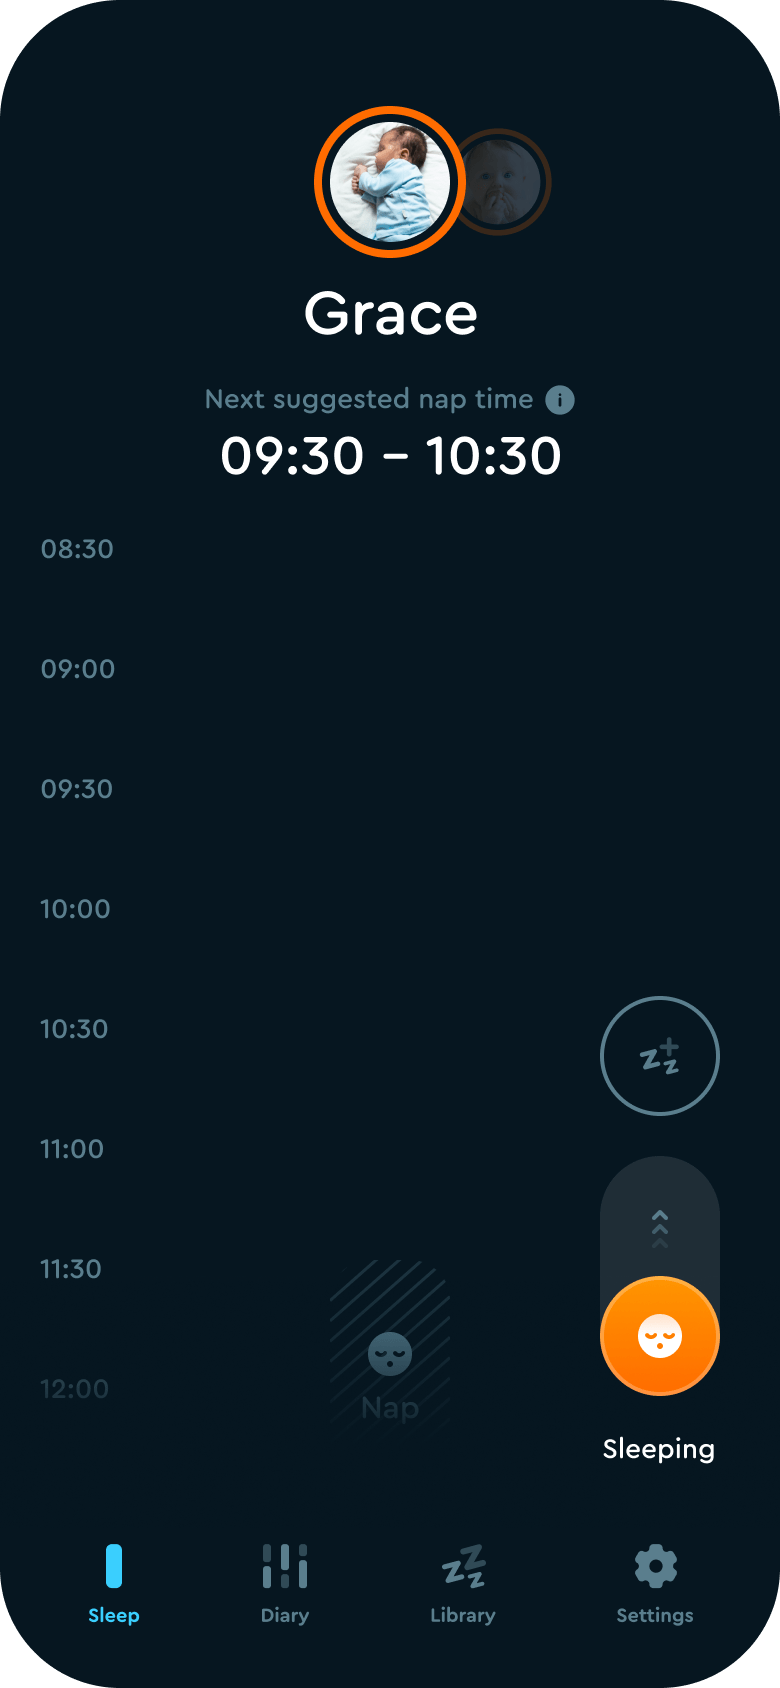 mockup of phone with sleep schedule interface